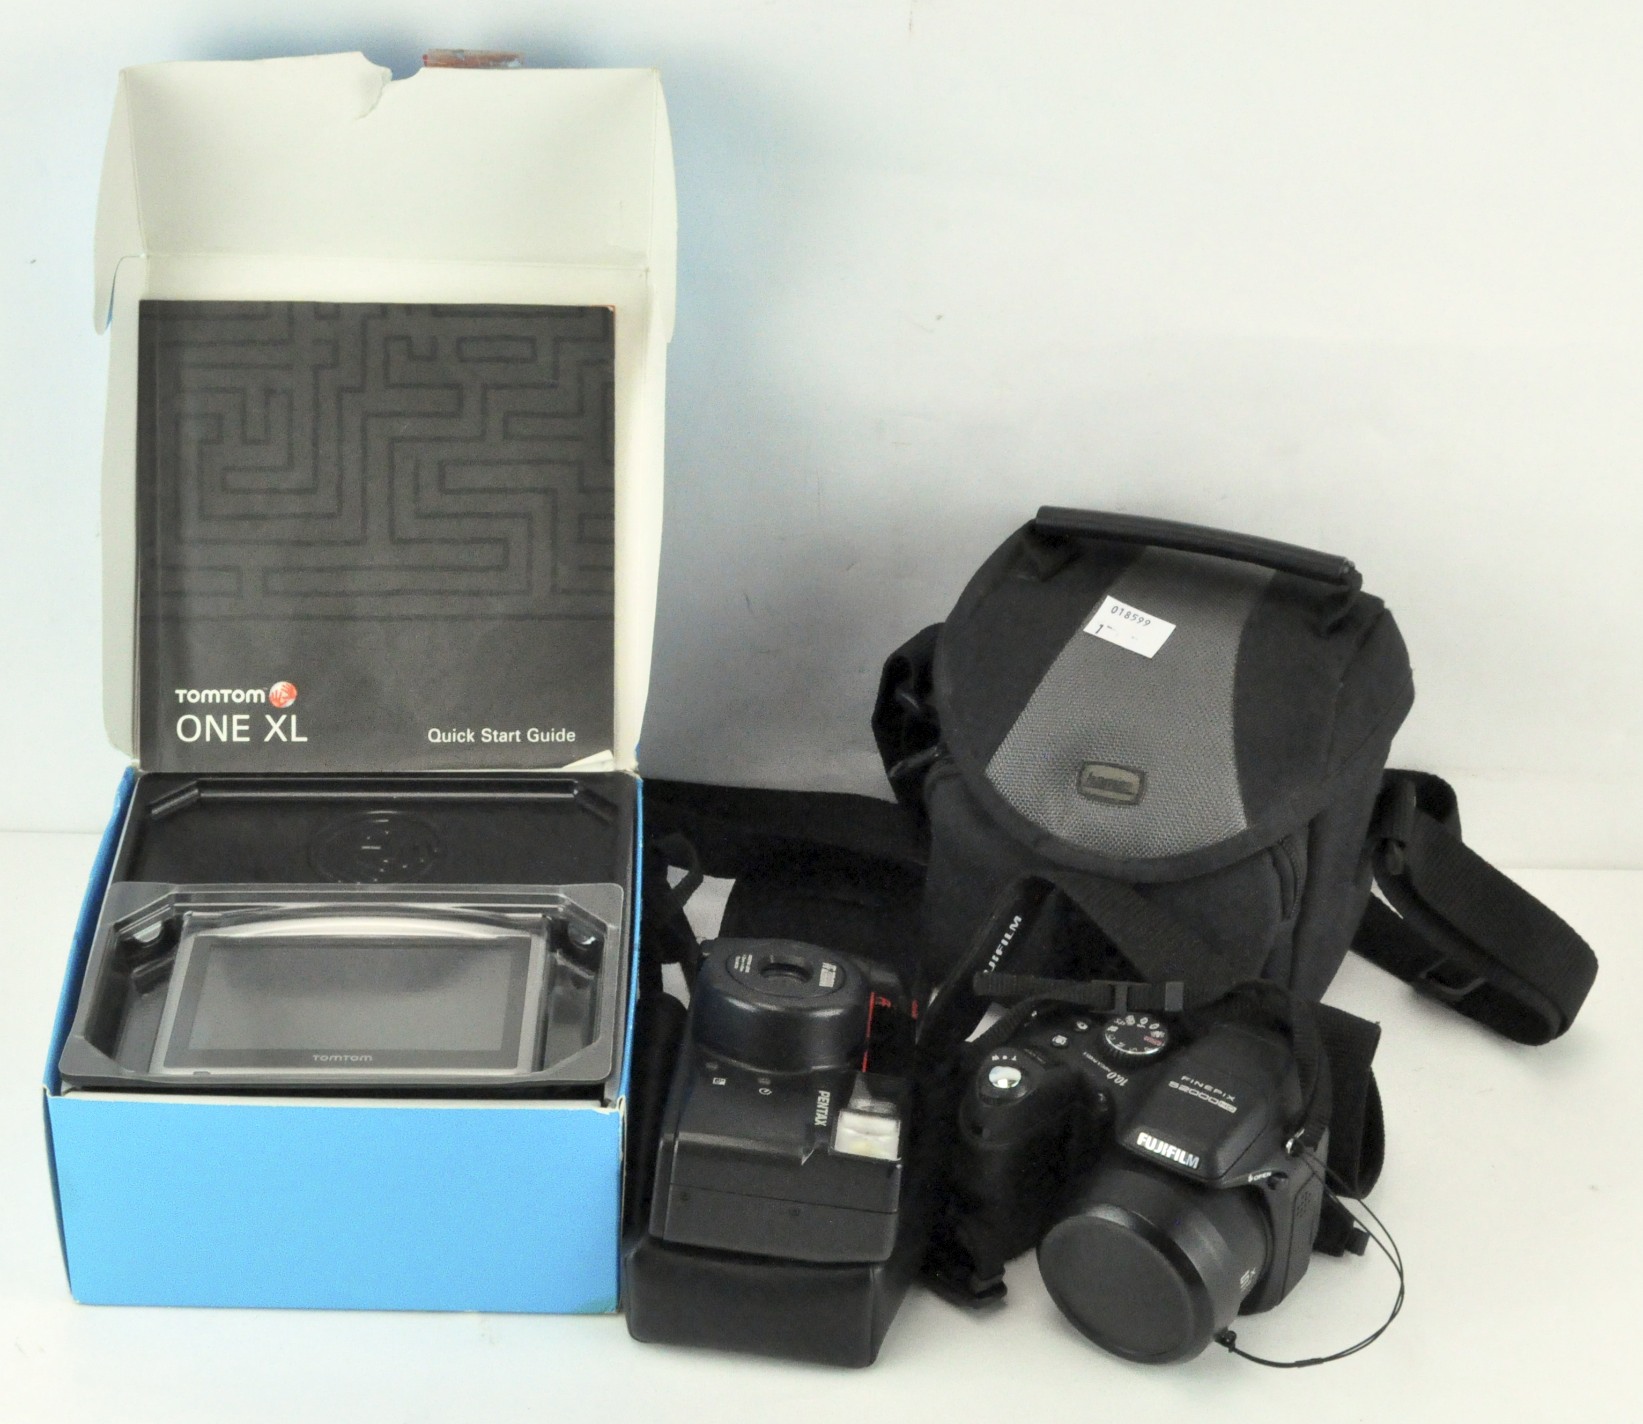 A Pentax zoom 70-s camera and case, Finepix S2000HD digital camera, with manual, leads and case,